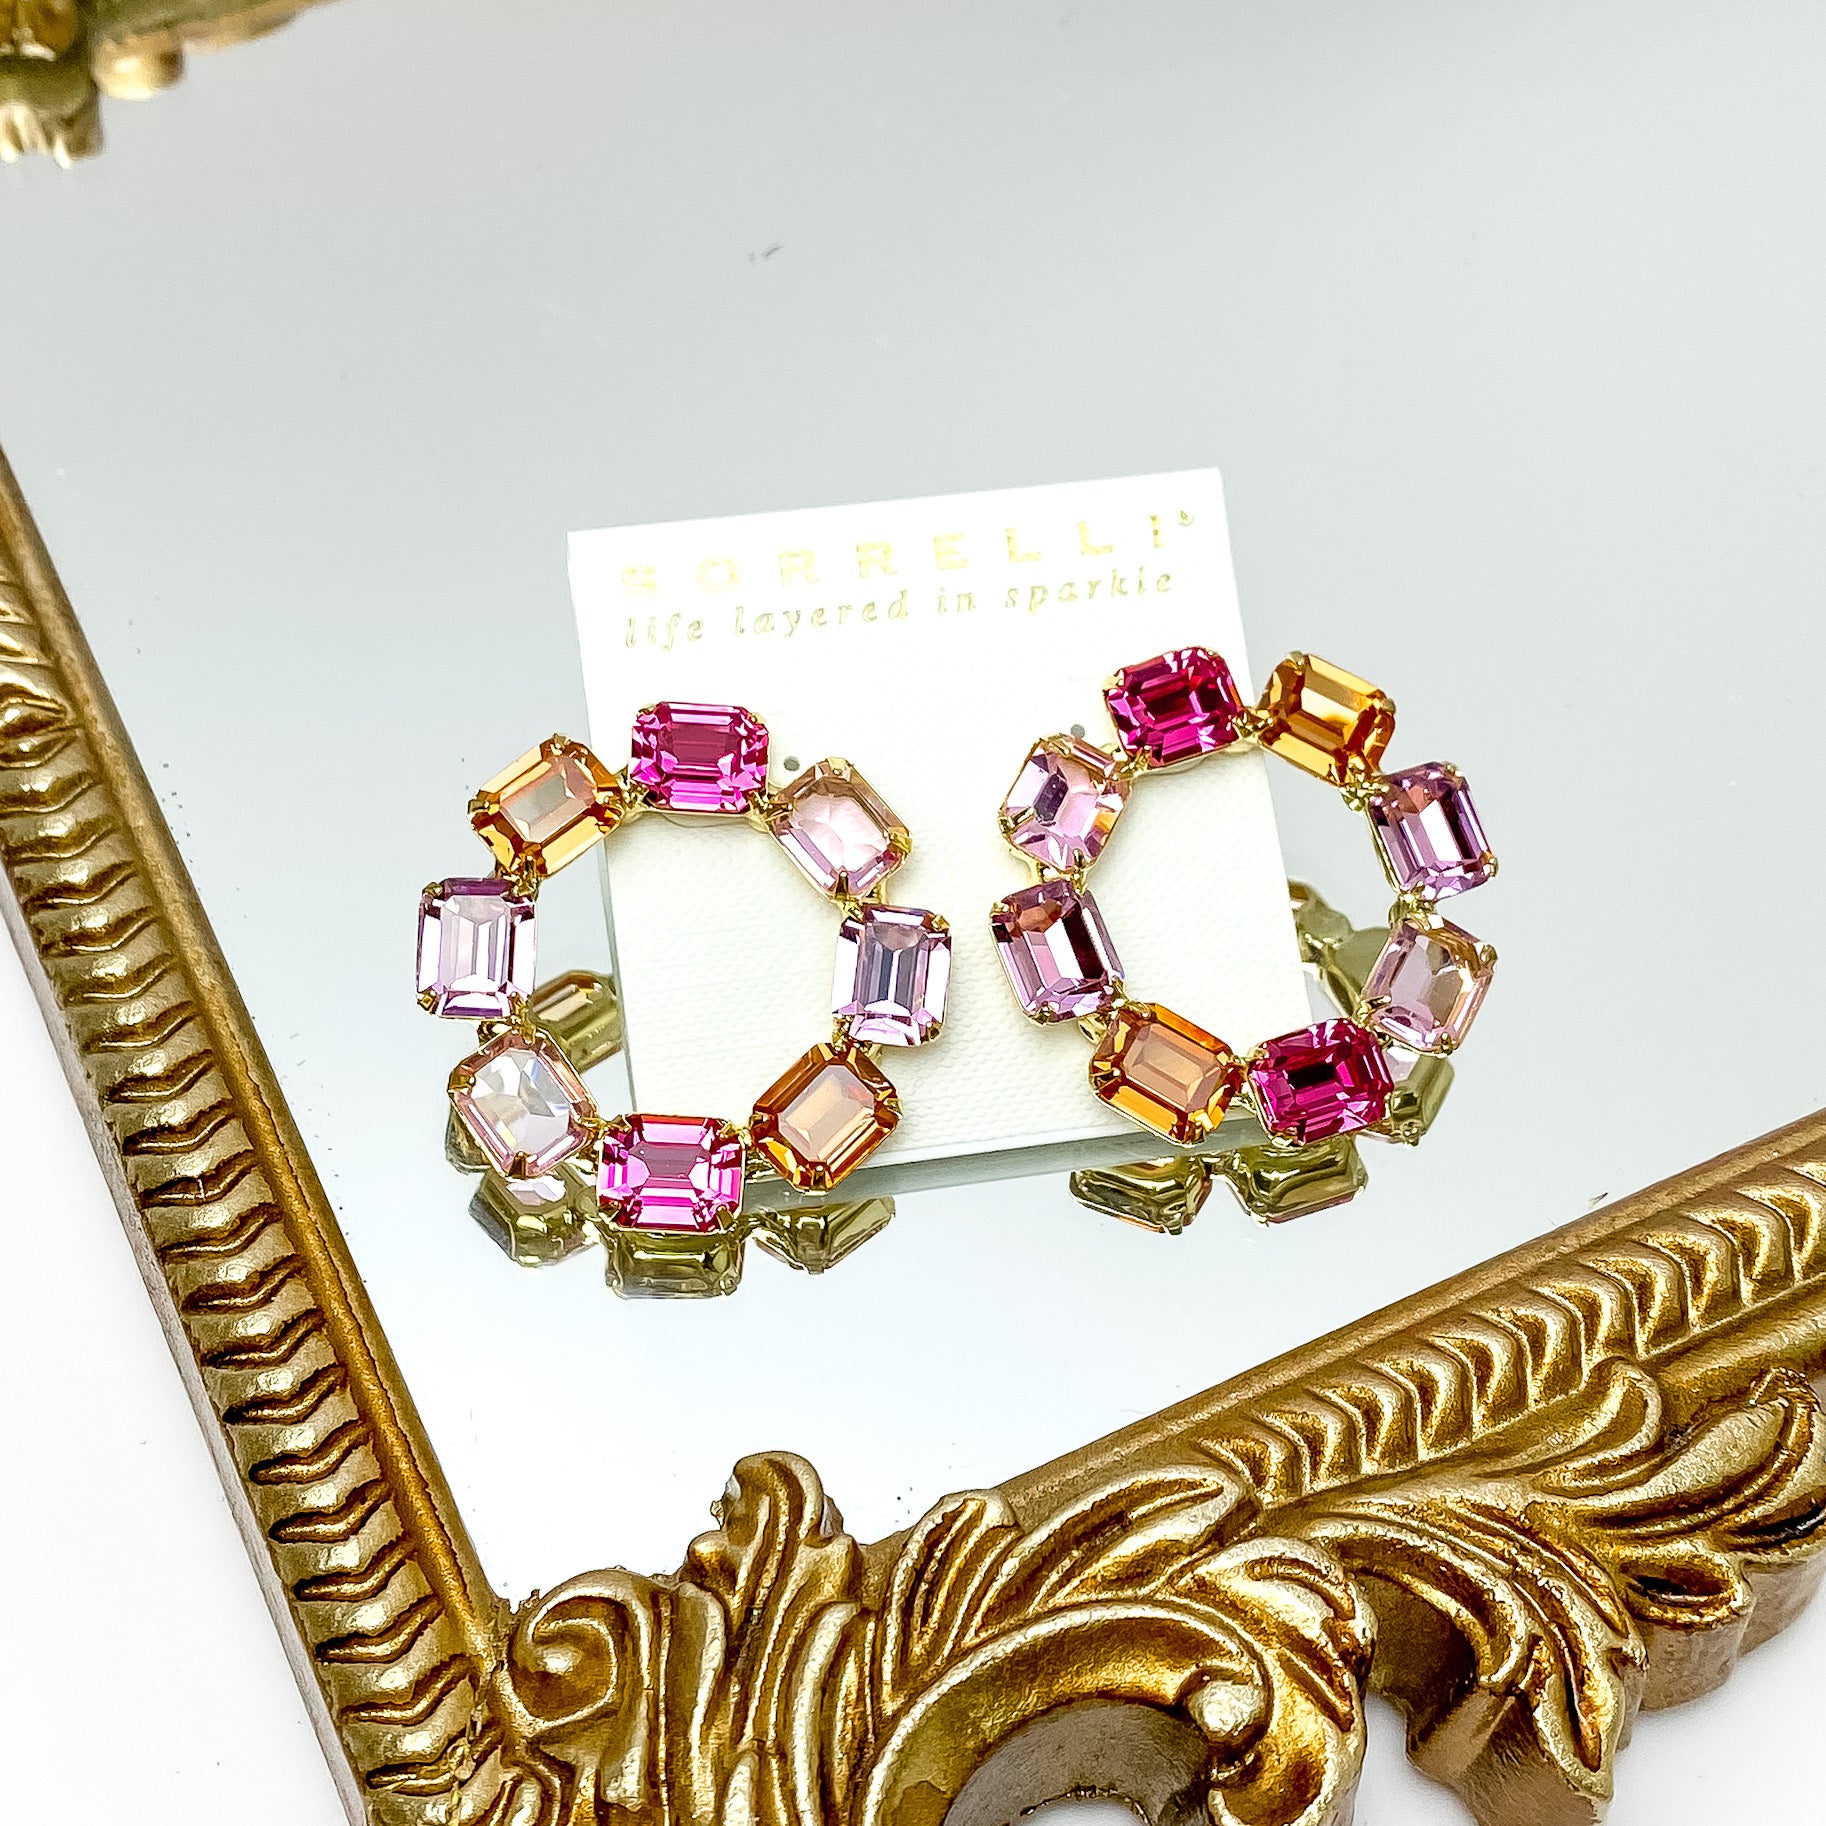 Eight rectangle crystals in pink mix in the shape of an octagon post back earrings. These earrings have a gold setting and gold prongs to hold the crystals in place. These earrings are pictured on a gold mirror on a white background. 